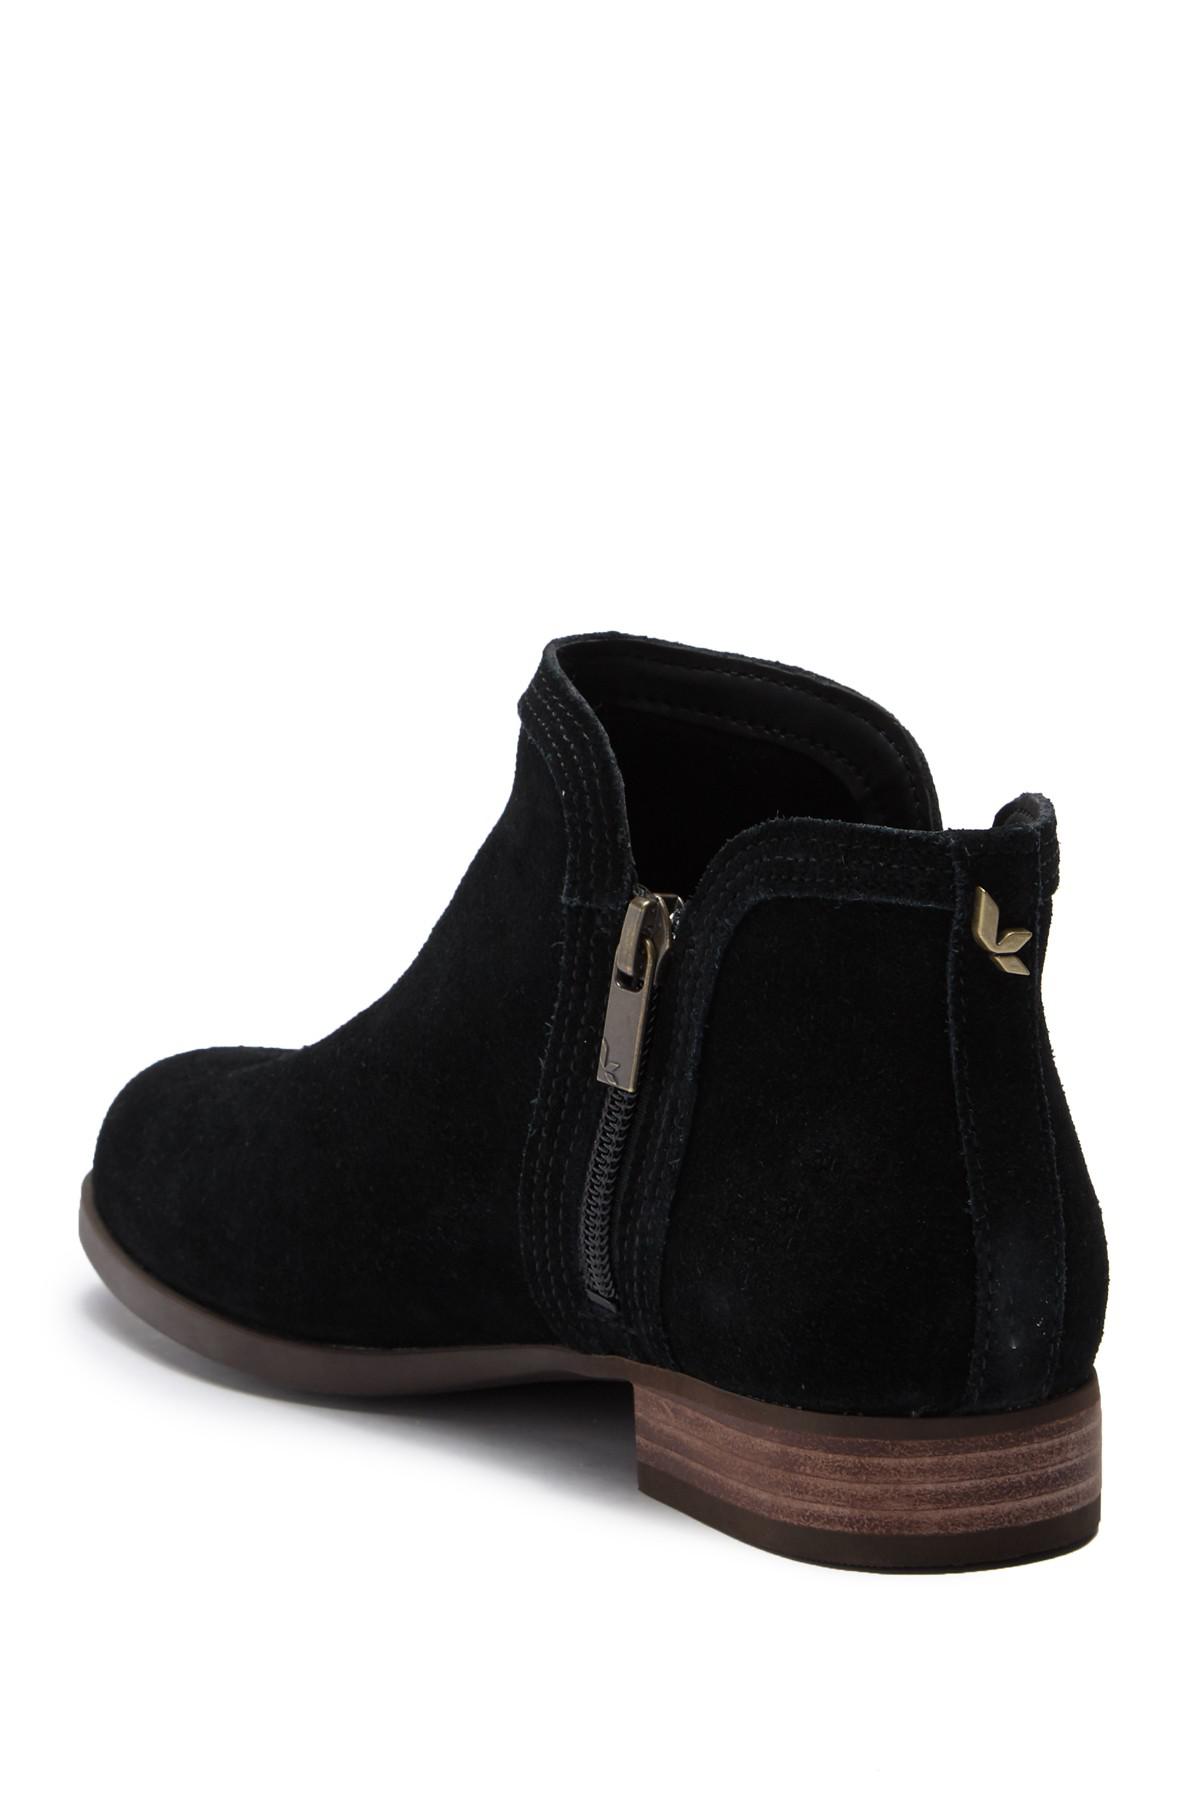 UGG Leather Cheyanna Suede Ankle Bootie 